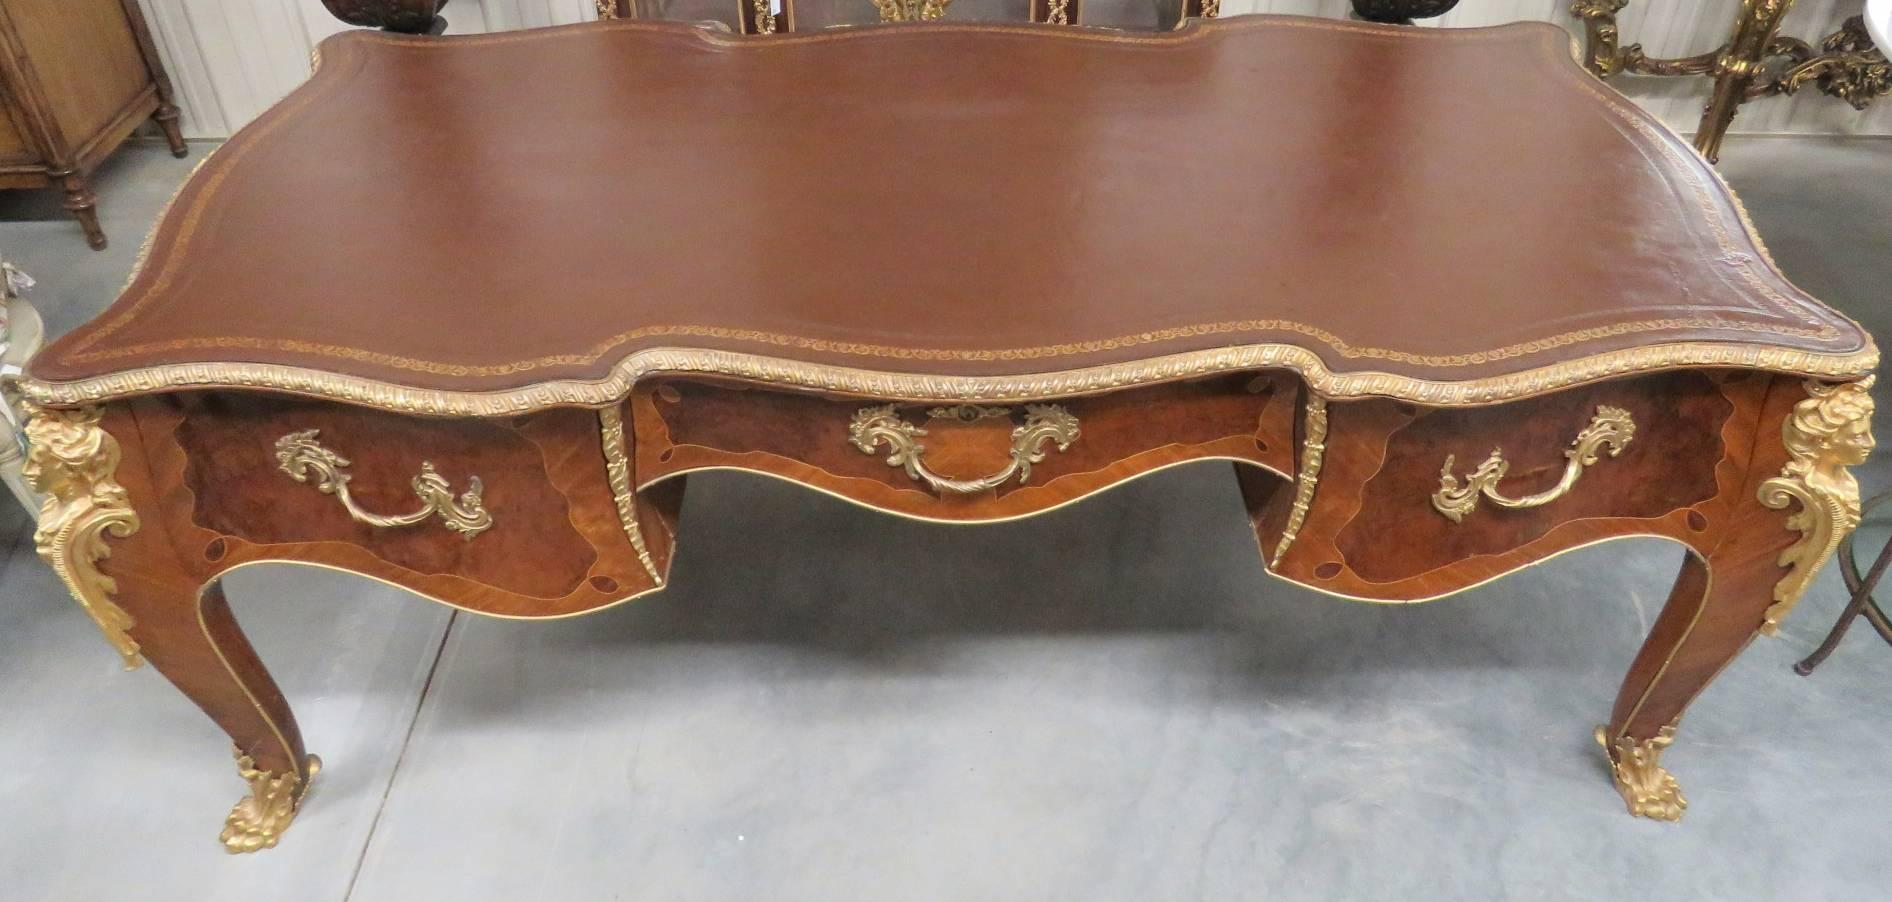 American 19th Century Leather Top Figural Inlaid Desk